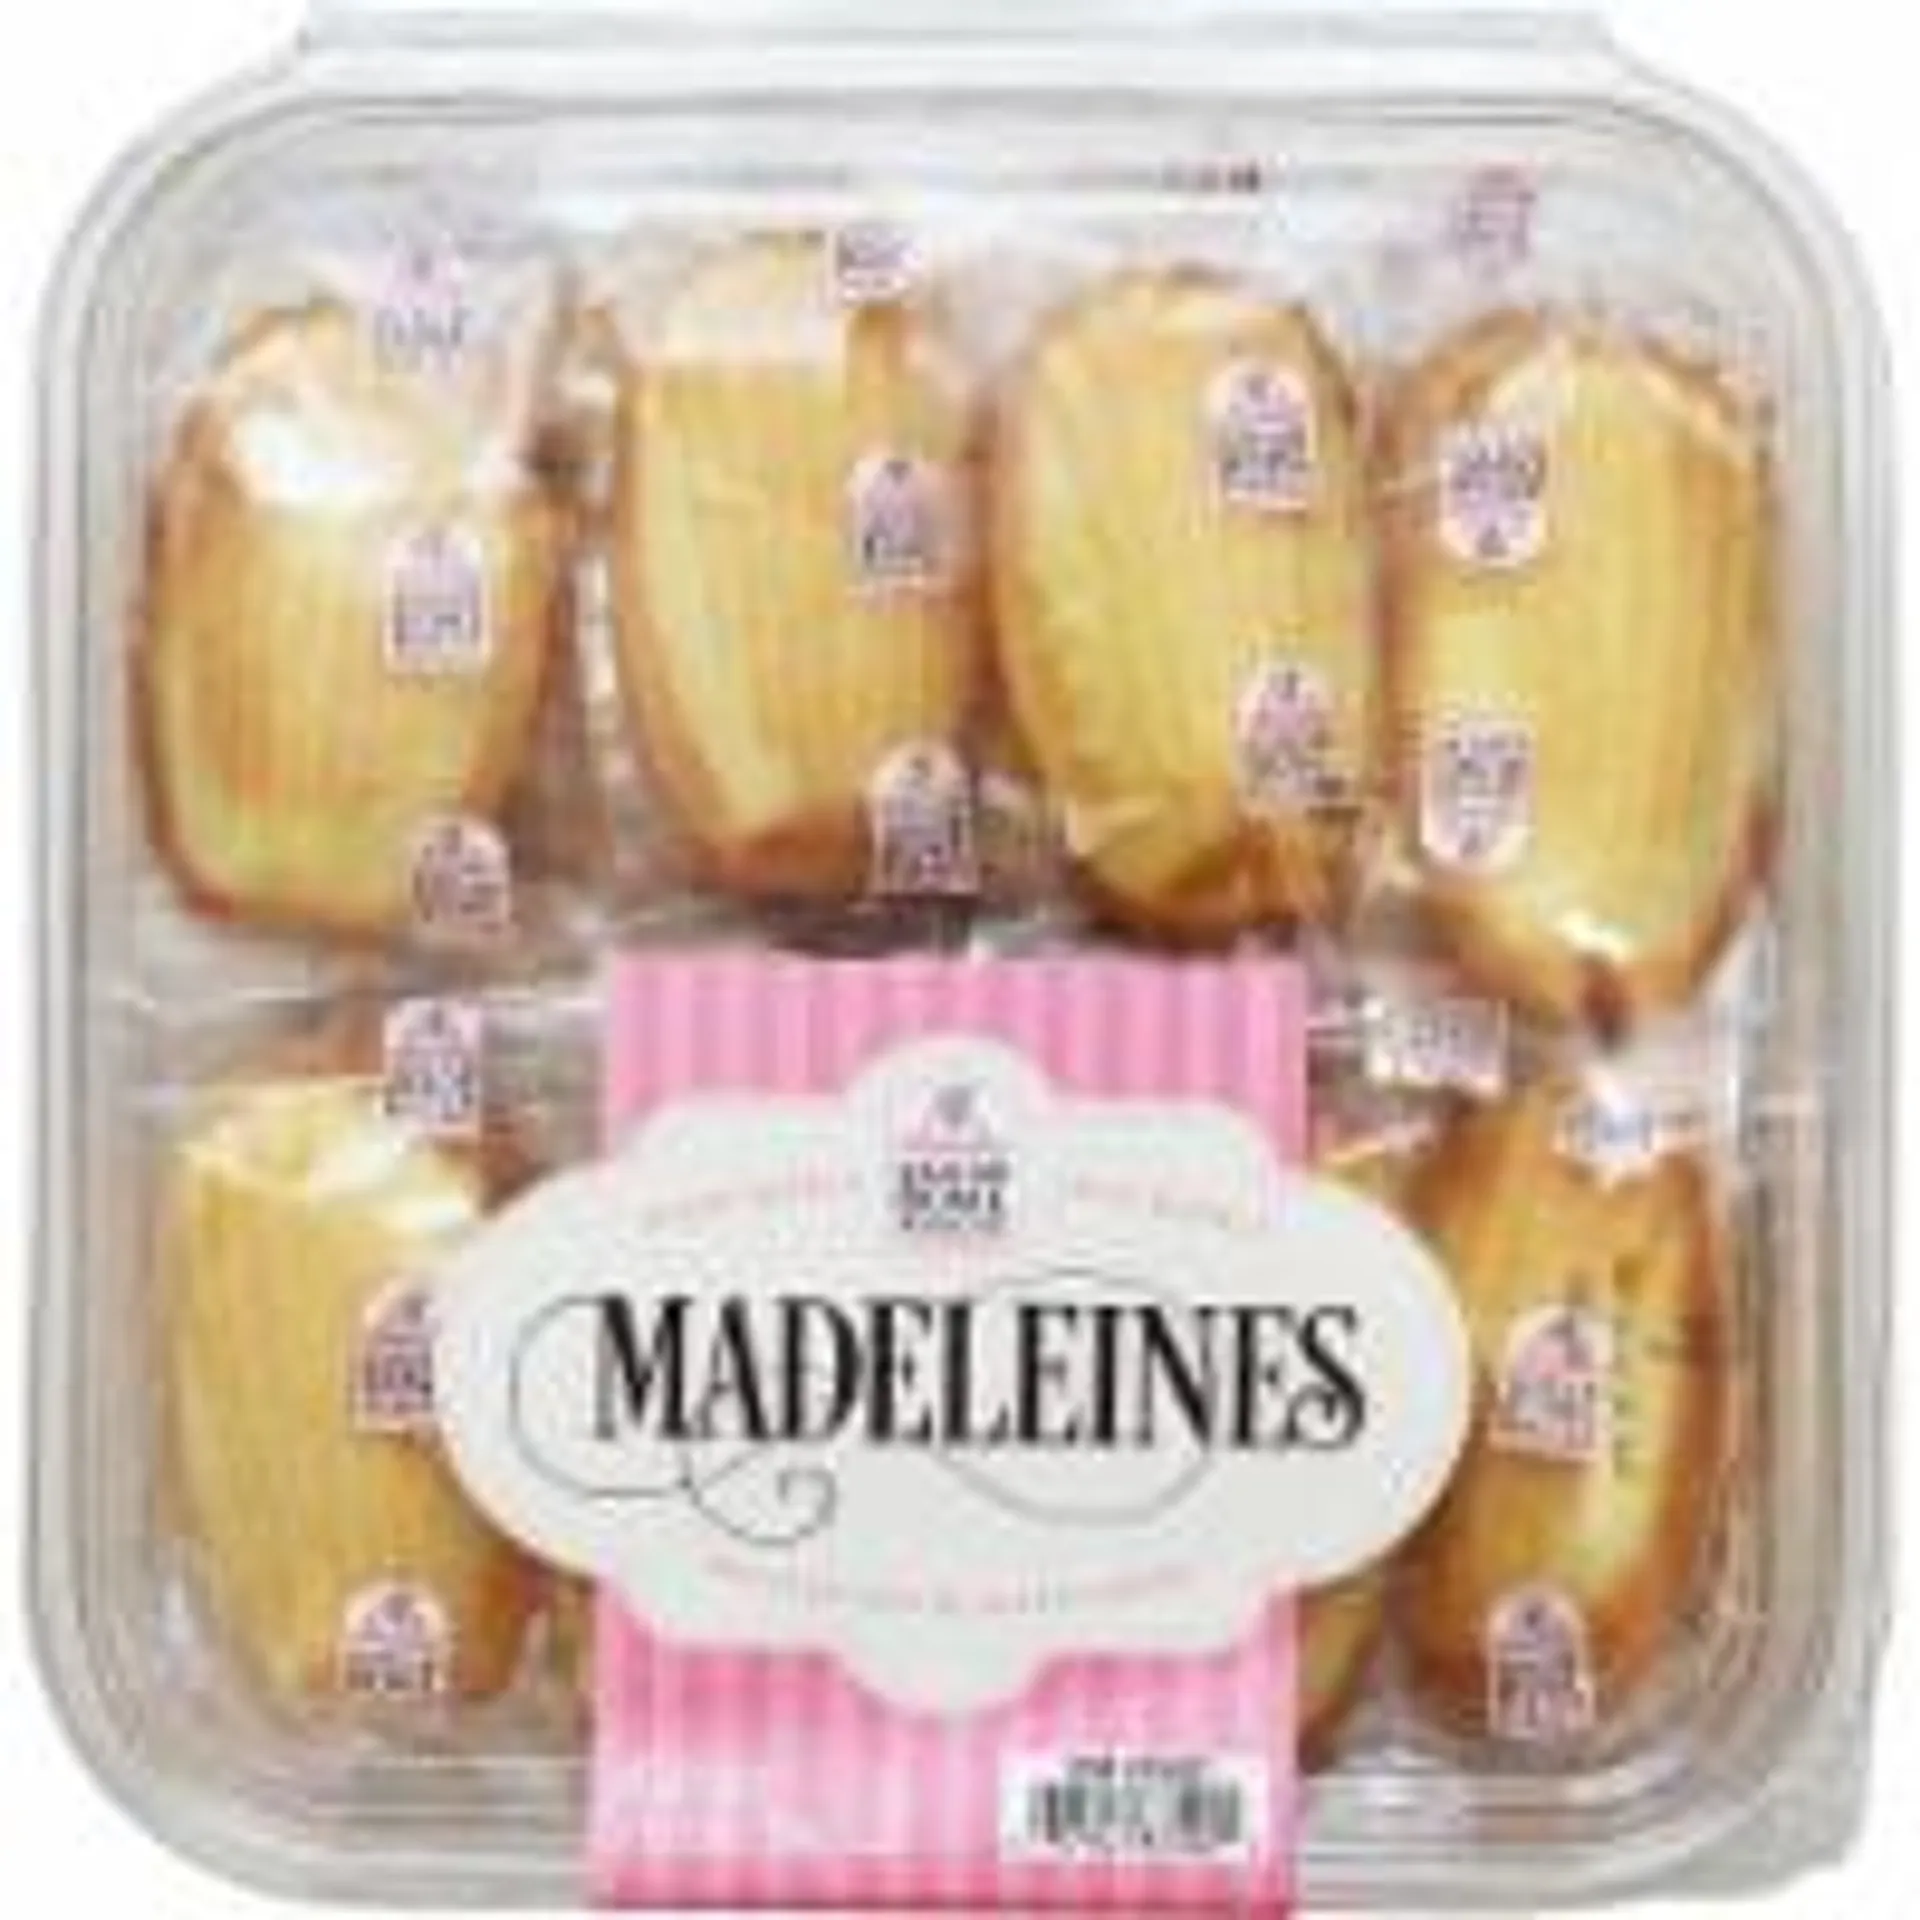 Sugar Bowl Bakery Madeleine Cookies, 1 Ounce (28 Count)